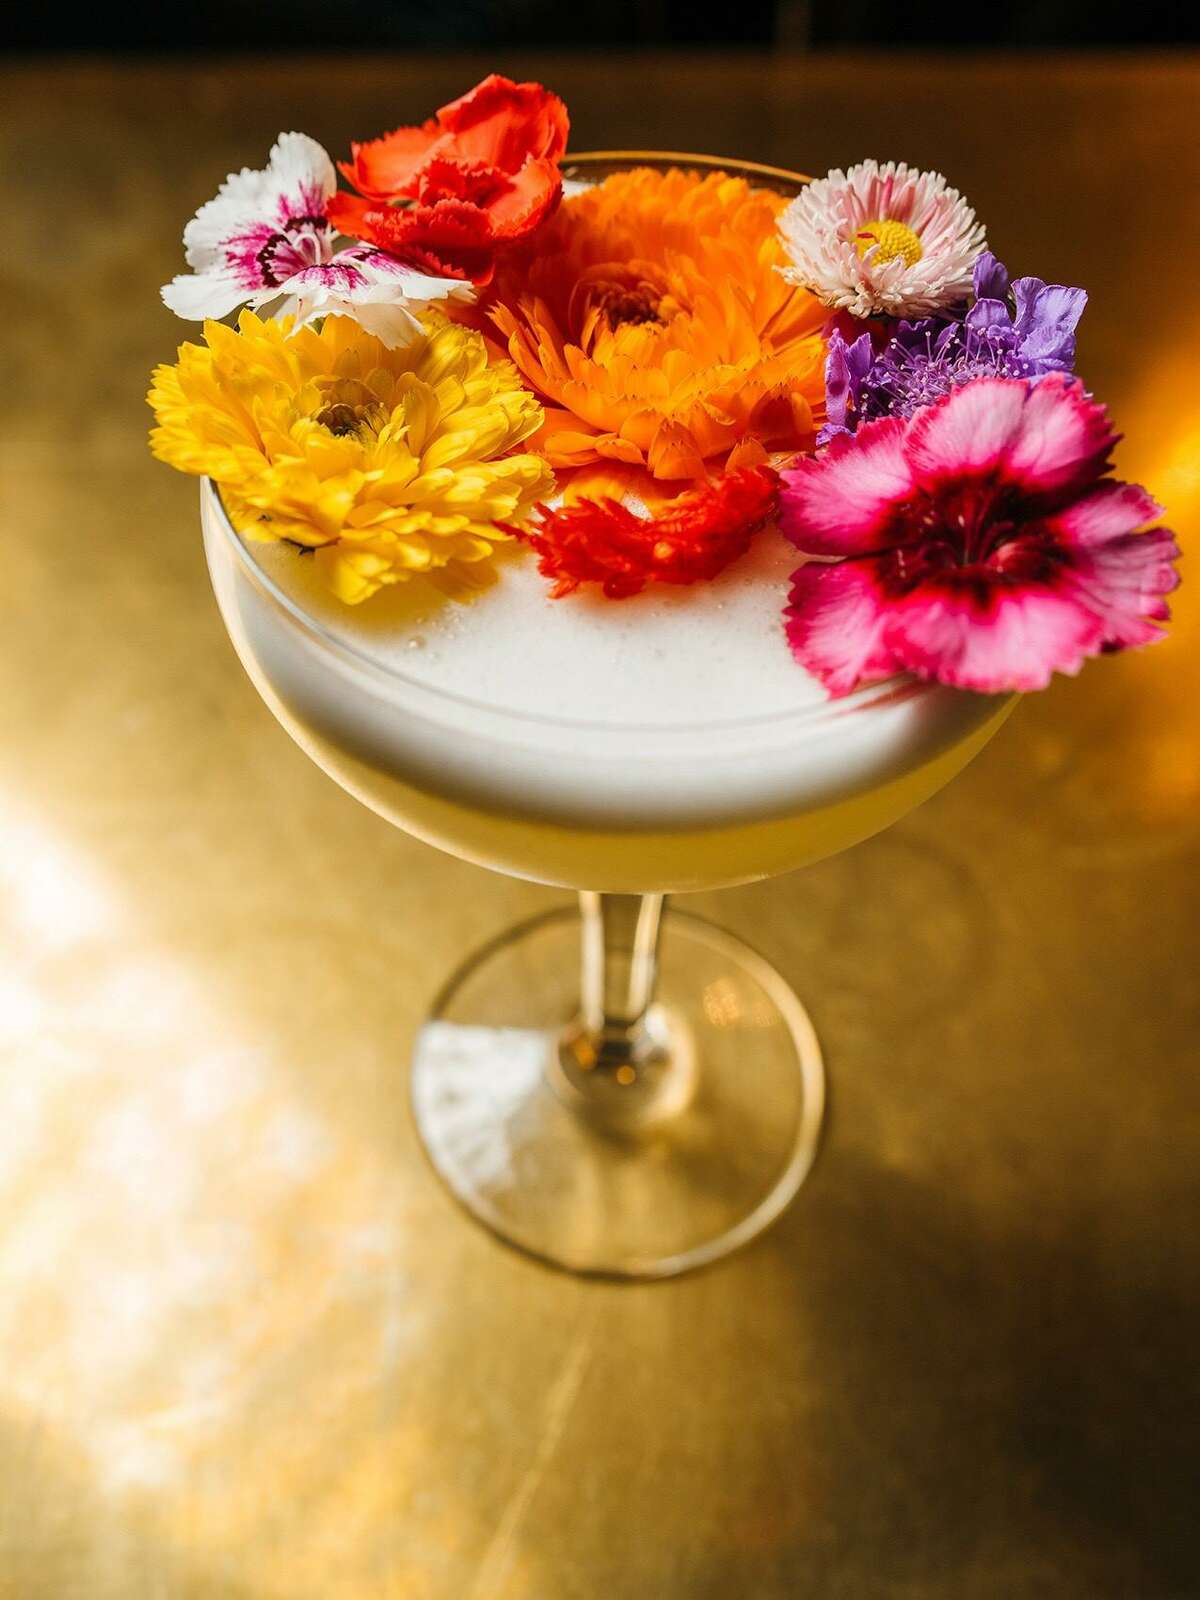 The Battle of Flowers is made with Uruapan Charanda (a take on Mexican rum originated in the State of Michoacan), passion fruit, fresh lime juice and piloncillo sugar, topped with an arrangement of edible fresh flowers. It is available at Juniper Tar, 244 W. Houston St.